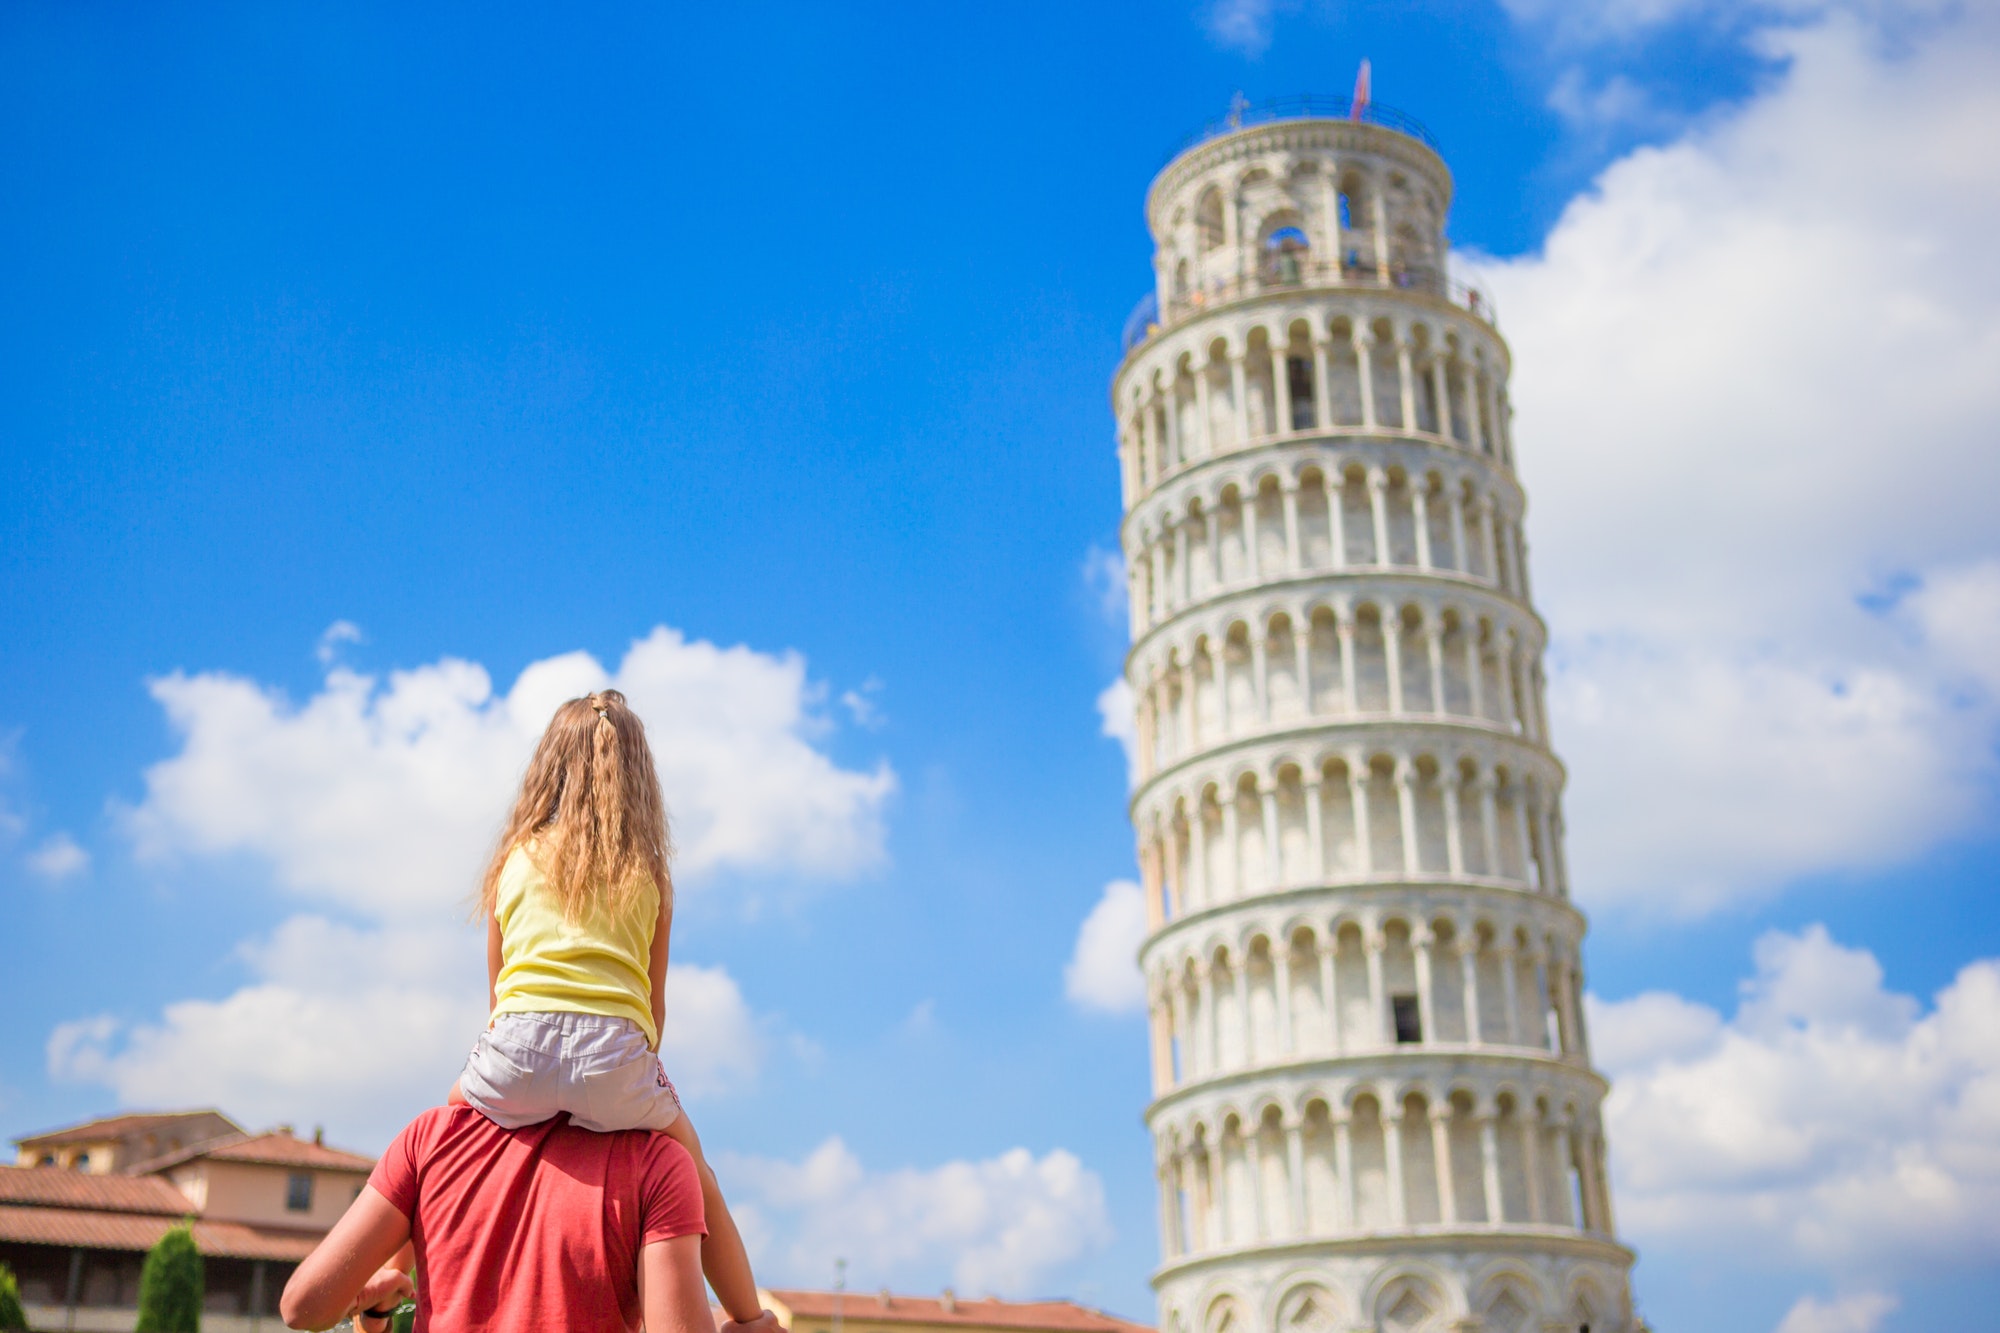 Last Minute Day Trips Discount to Italy